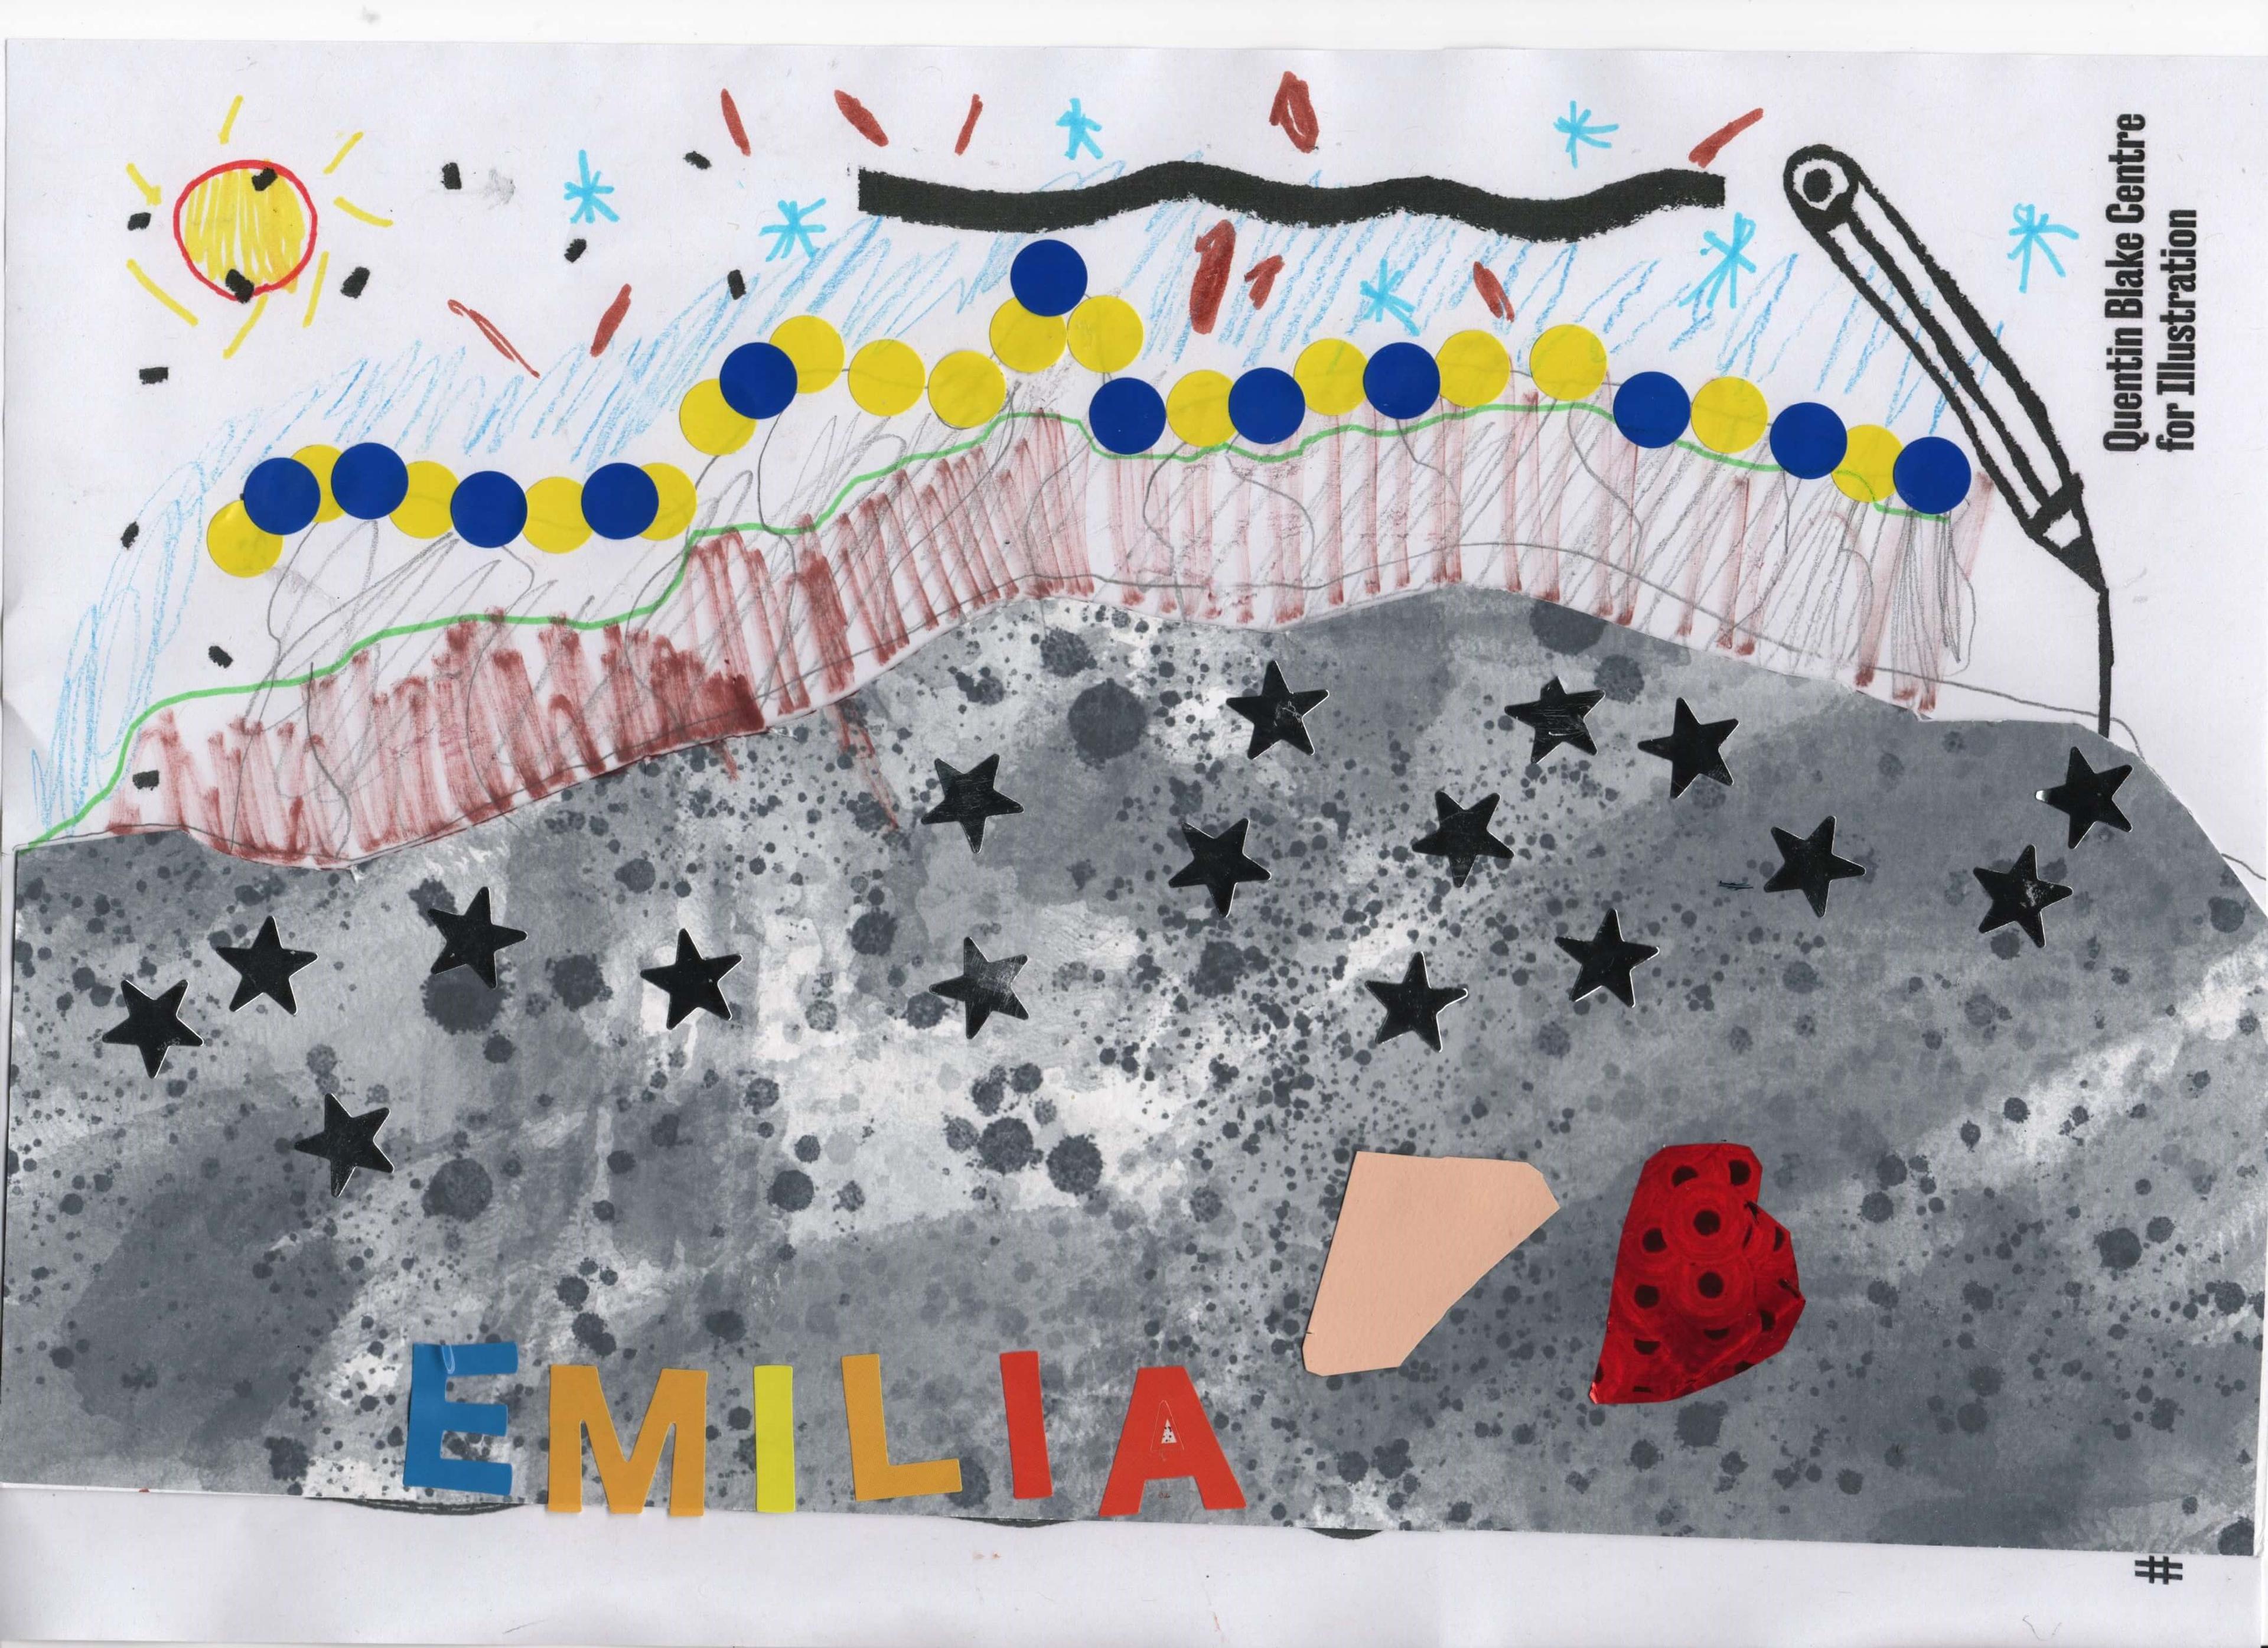 An abstract drawing with starry textured gray paint, brown marks, blue and yellow stickers and abstract shapes. The name 'Emilia' is included in coloured capital letters in the bottom left-hand side.